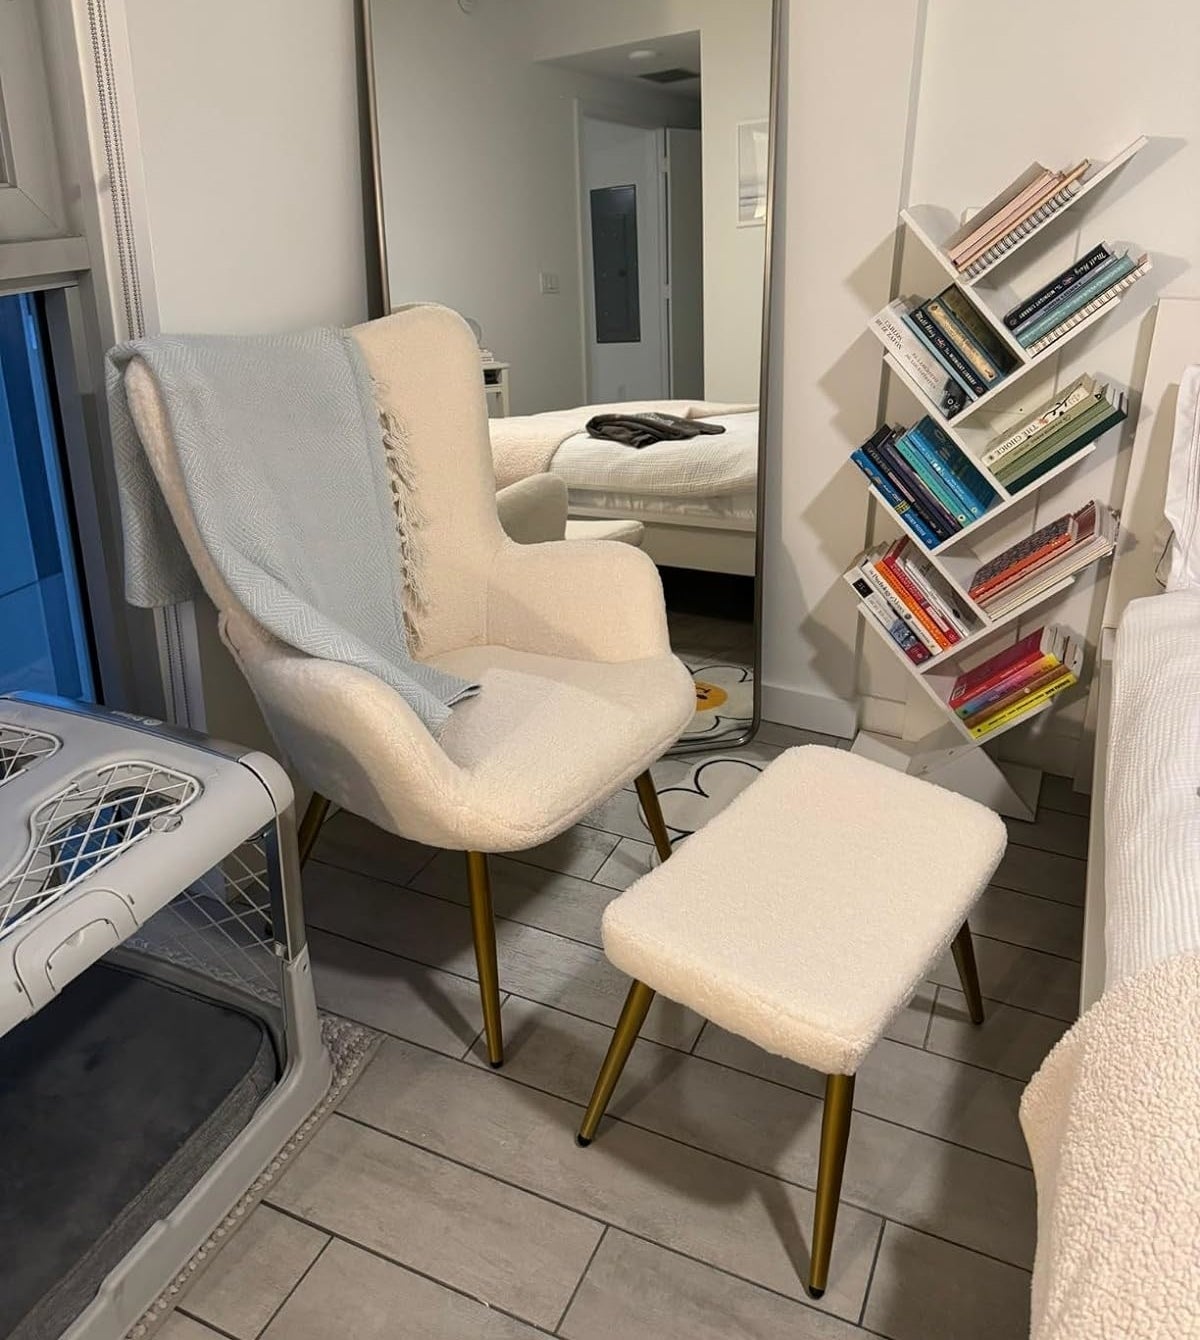 Modern style chair and footrest with gold legs in a cozy reading corner, next to a full bookshelf